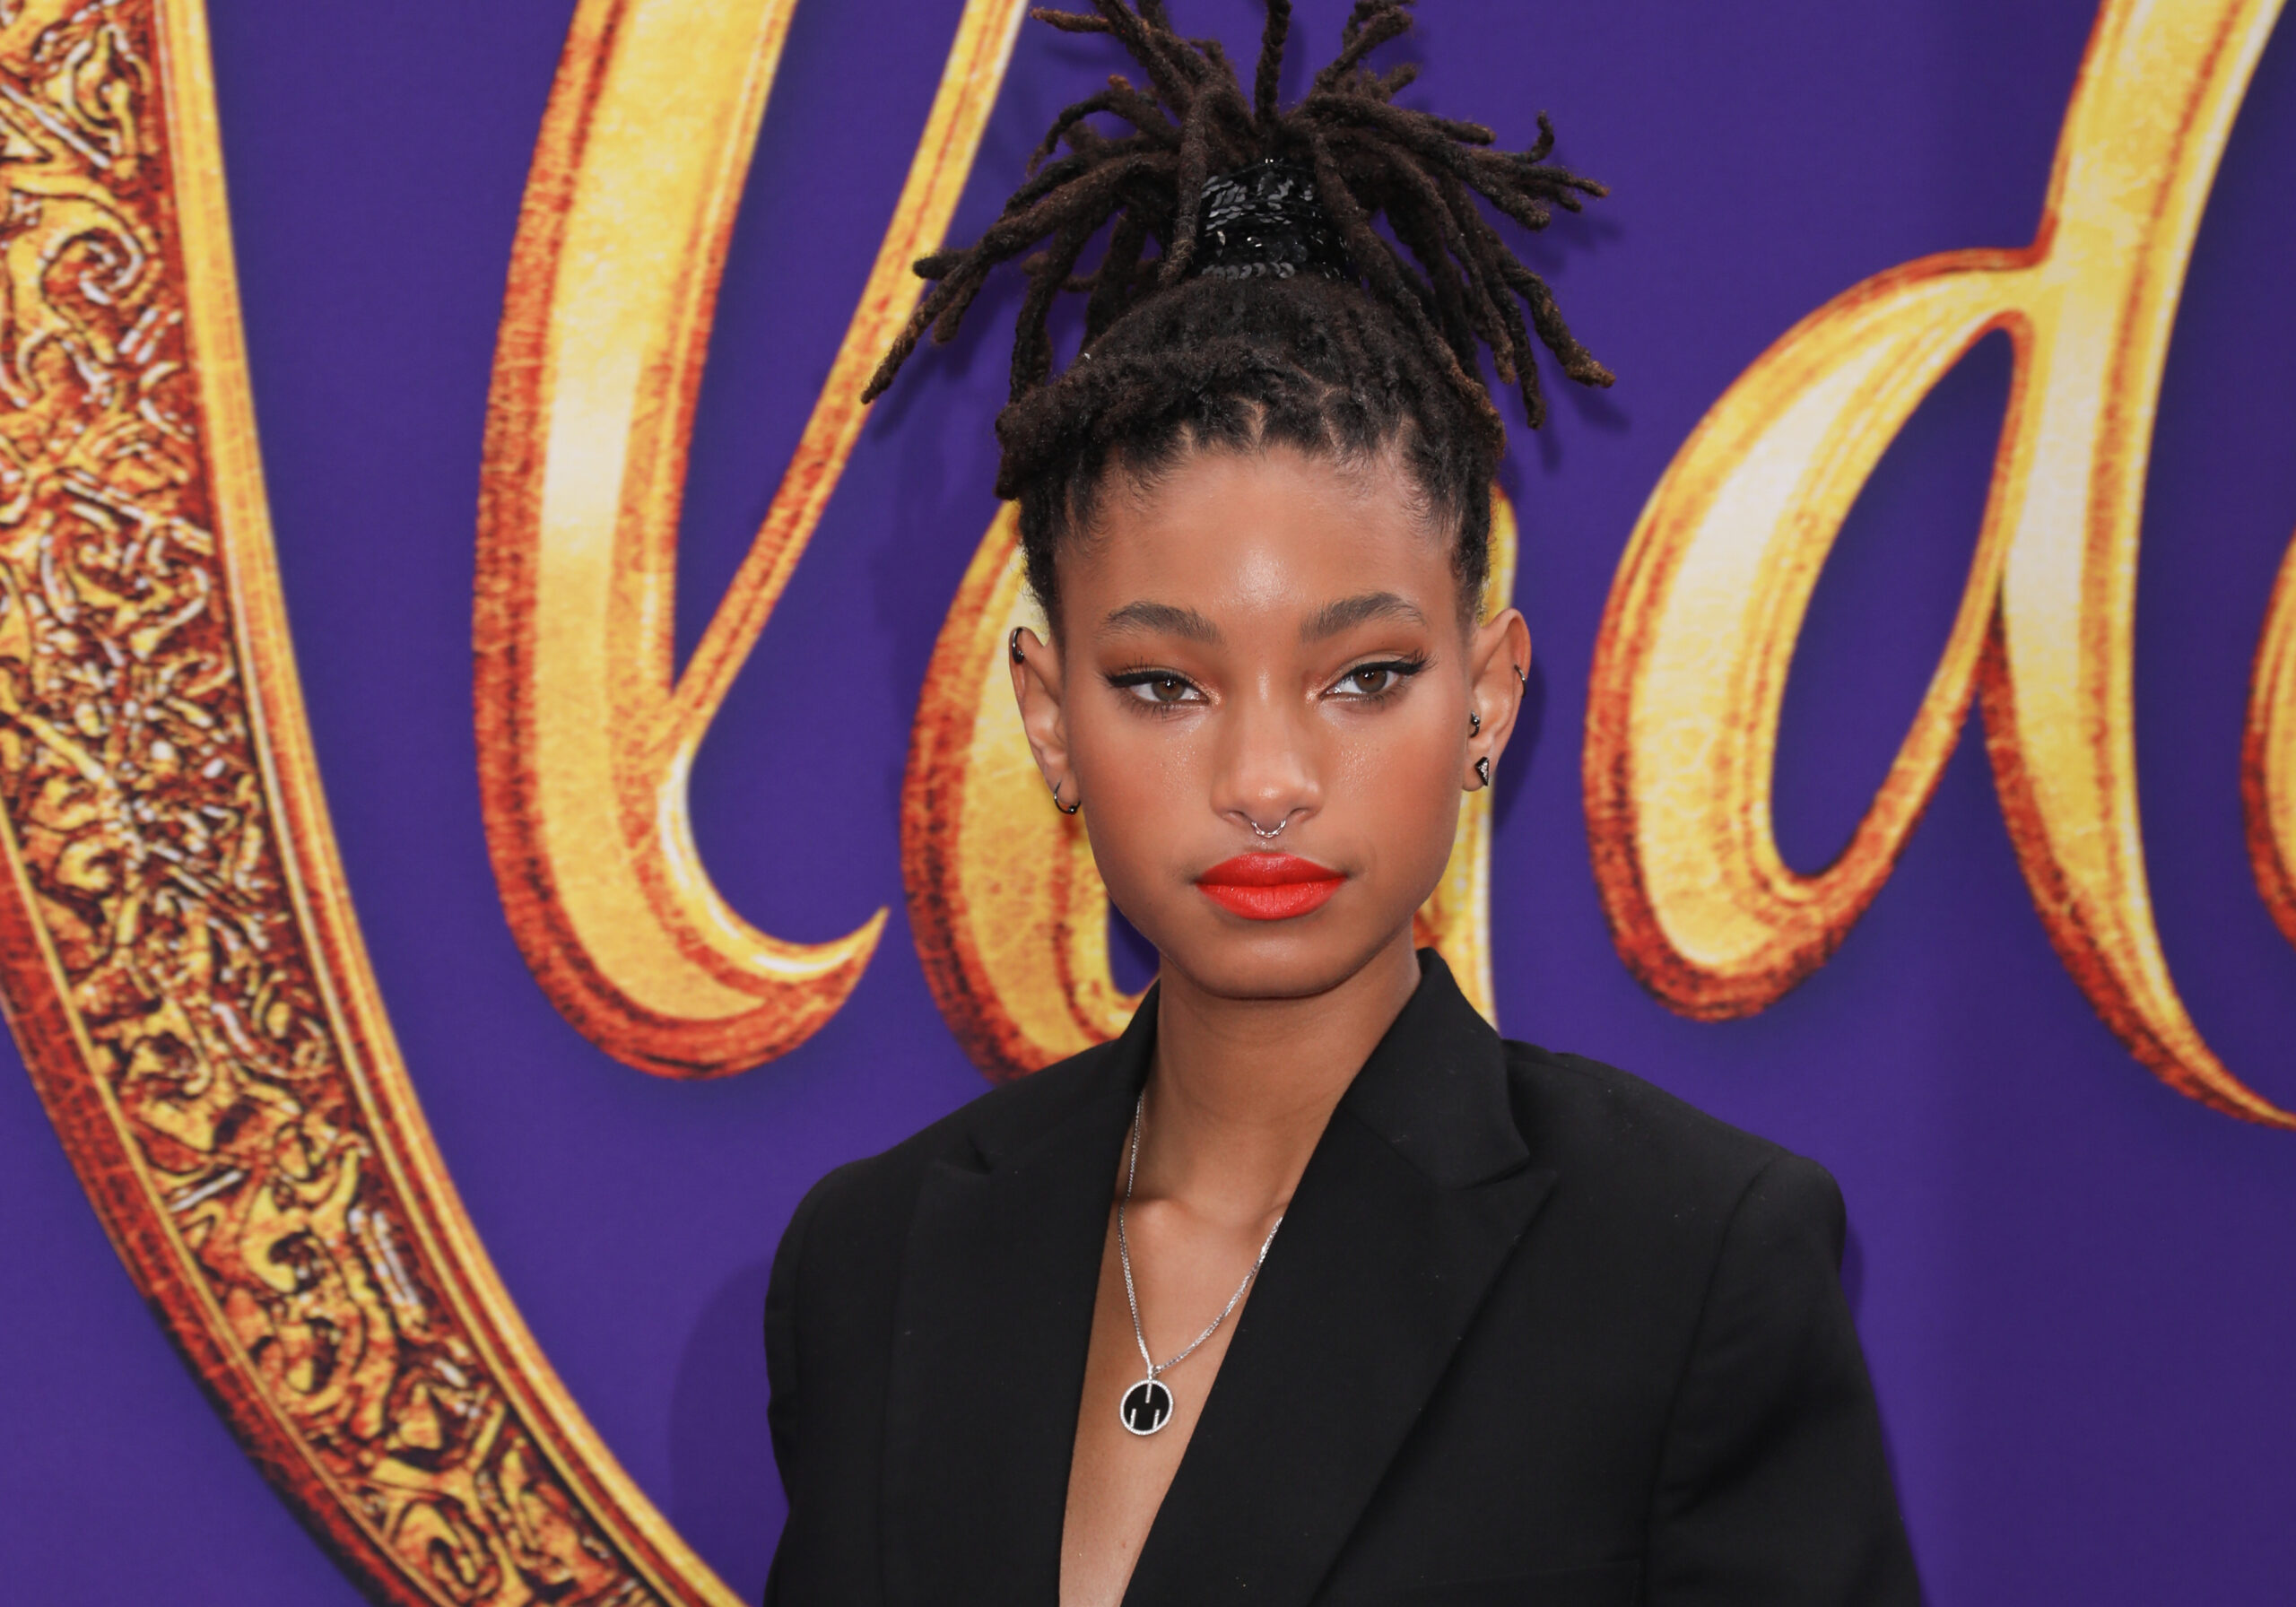 Willow Smith Shares Her Thoughts On Her Parents’ Discussions About Their Marriage